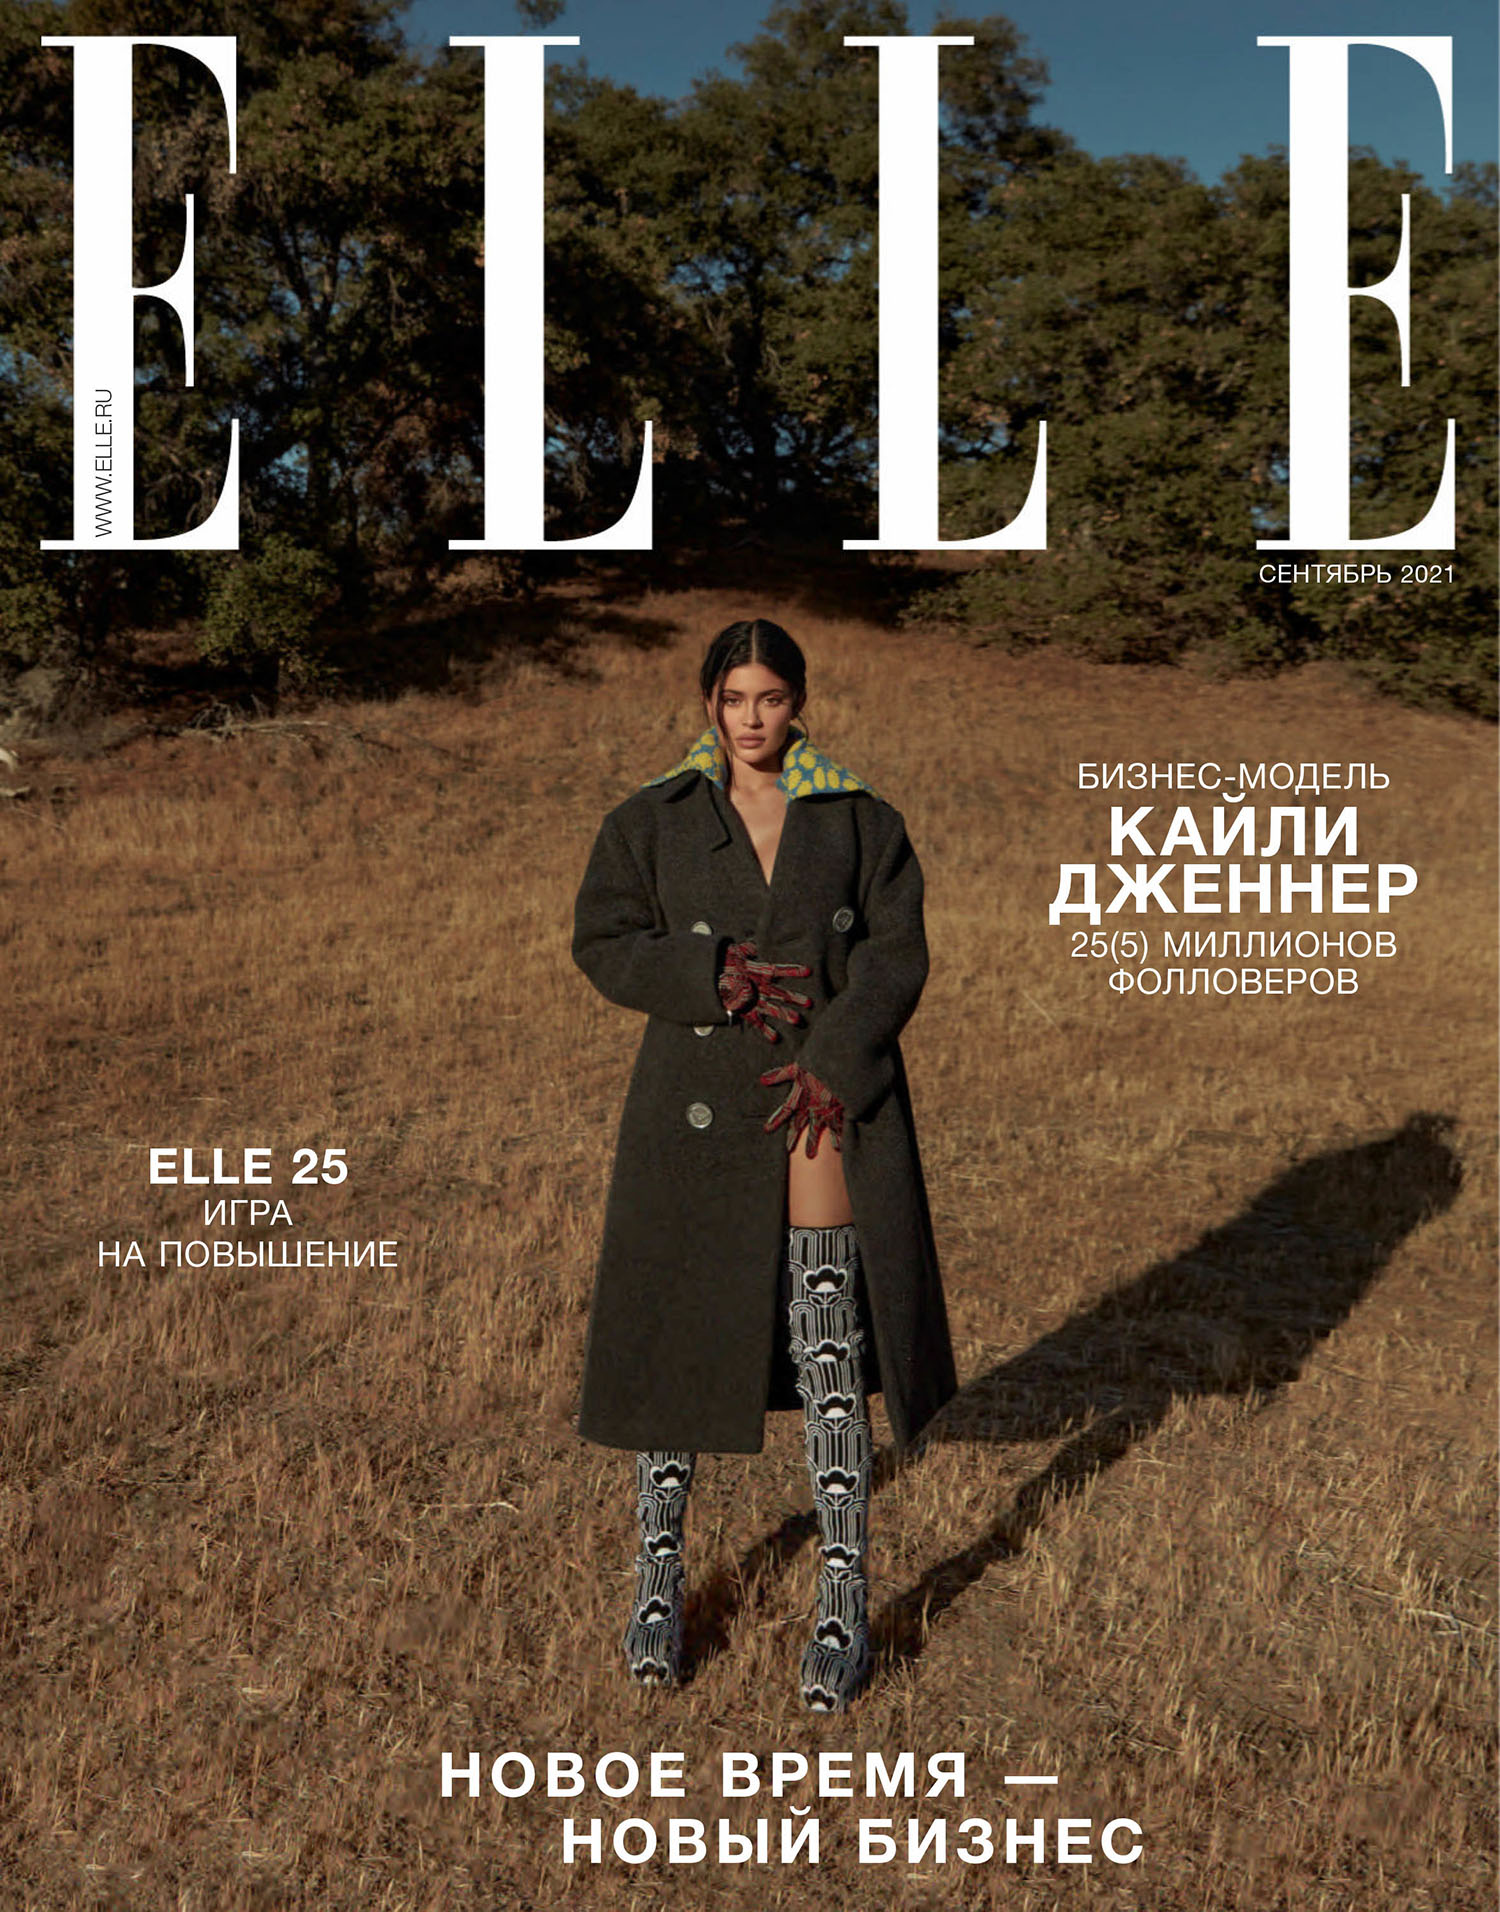 Kylie Jenner covers Elle Russia September 2021 by Greg Swales